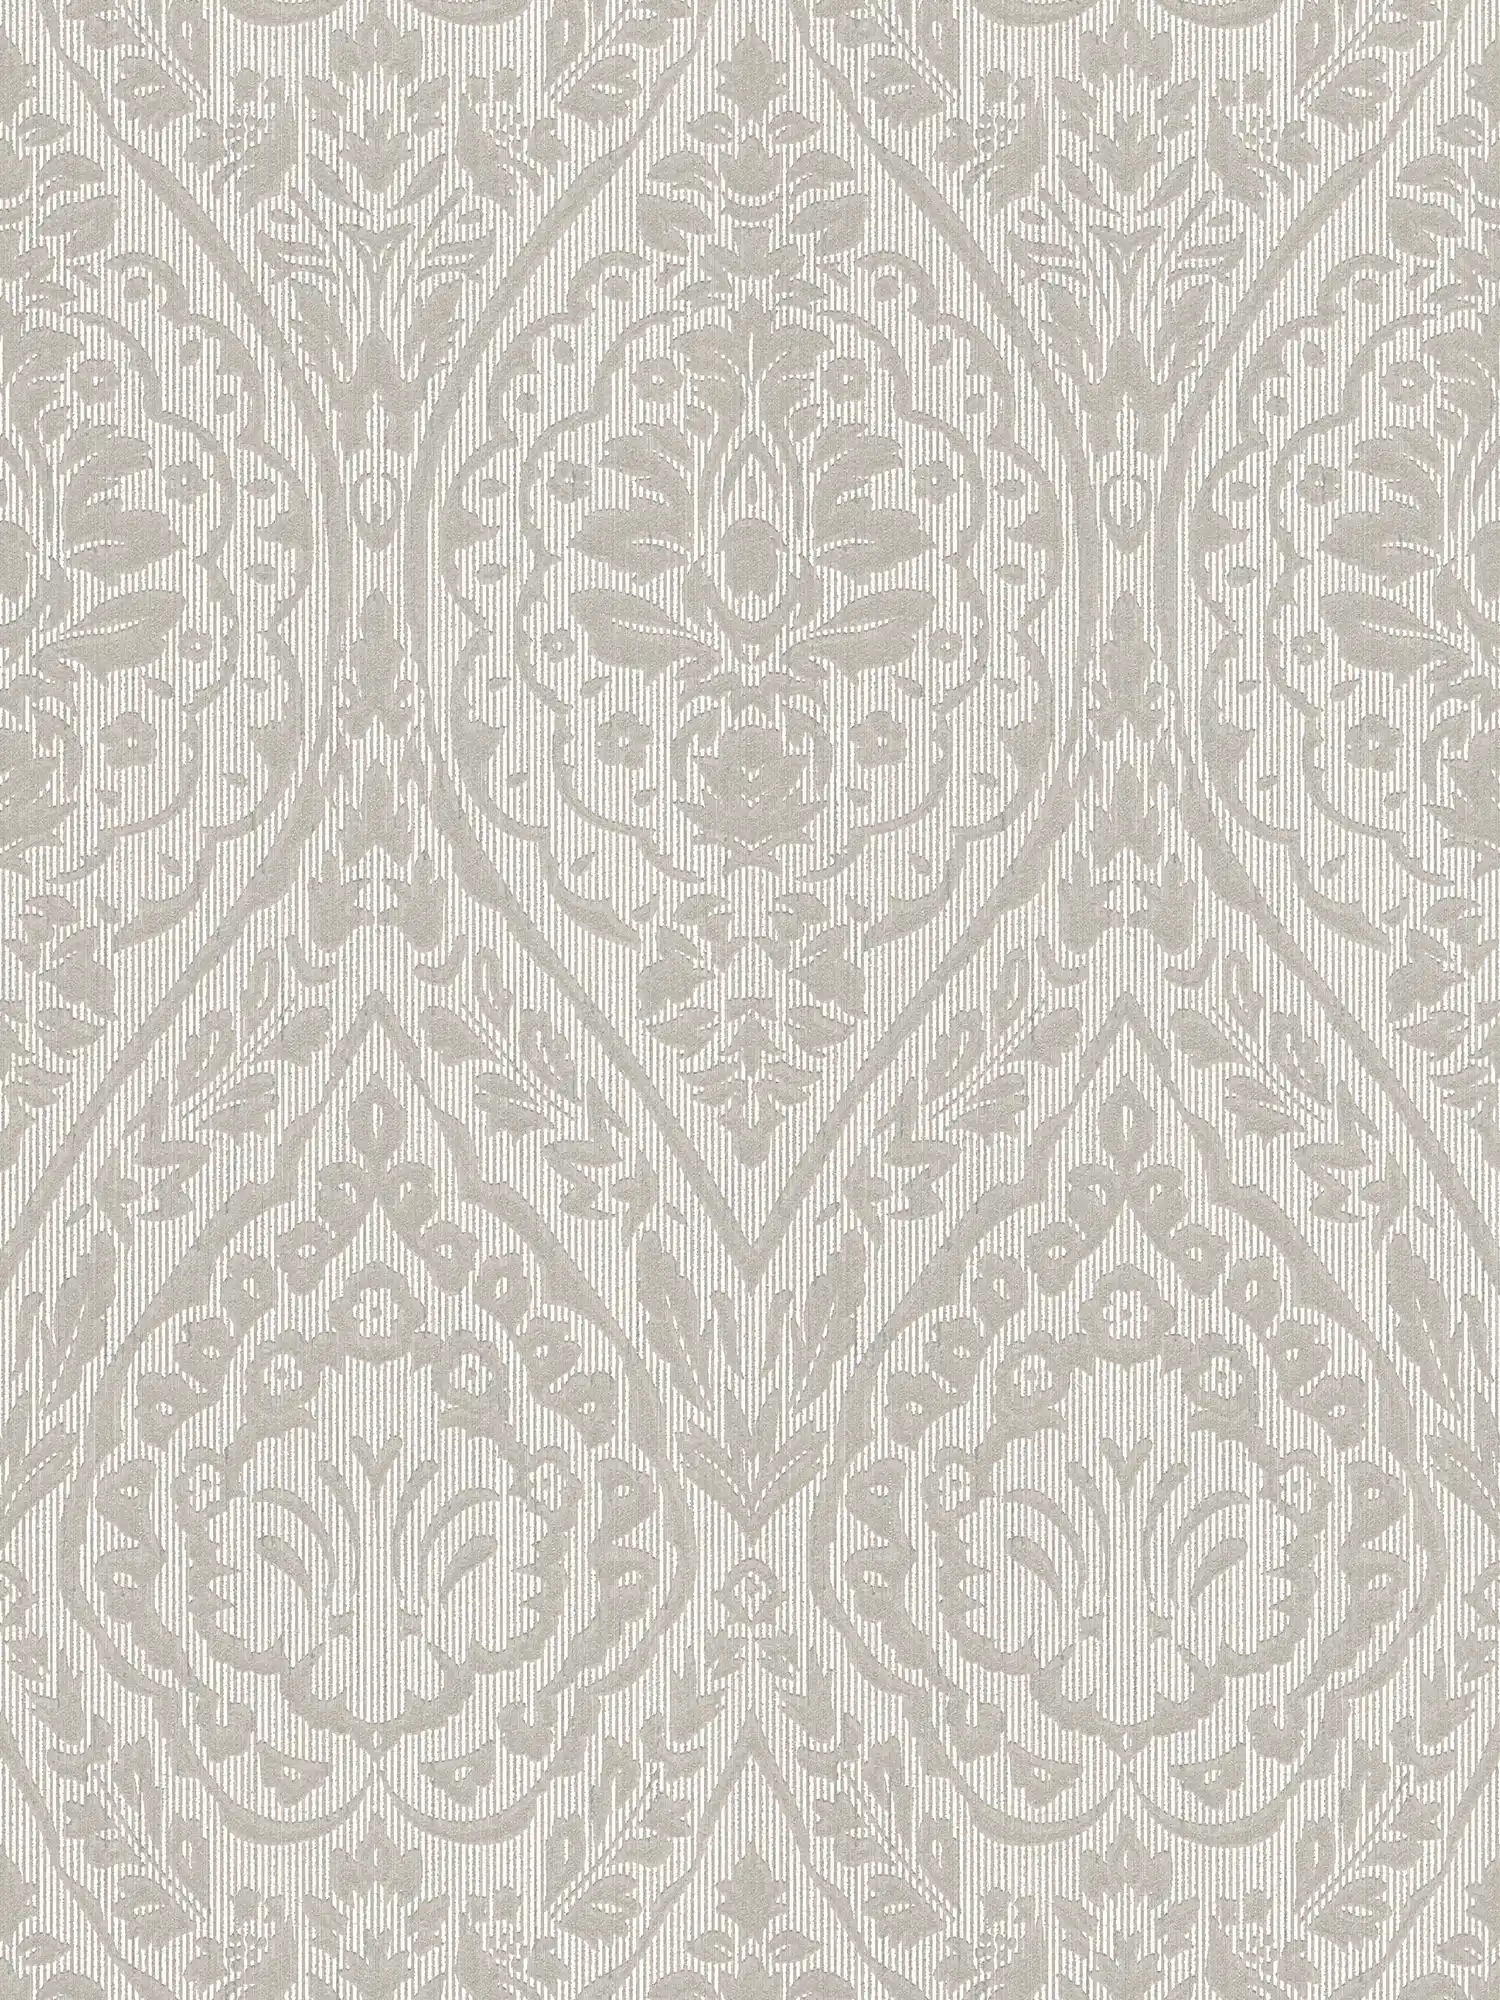 Colonial style non-woven wallpaper floral pattern & texture effect - cream
